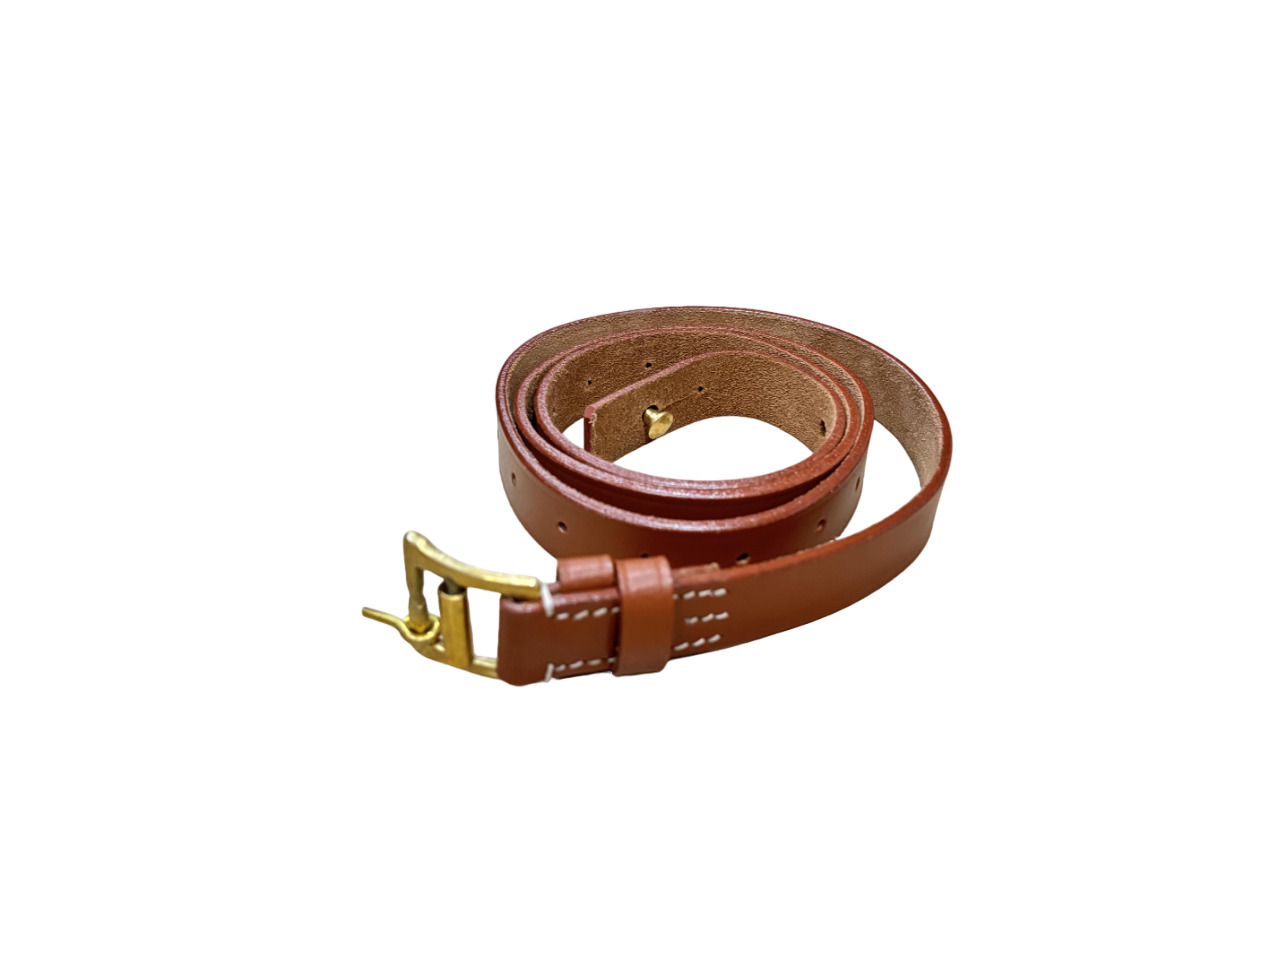 Warcraft Exports WWII Italian Carcano Rifle Leather Sling TAN